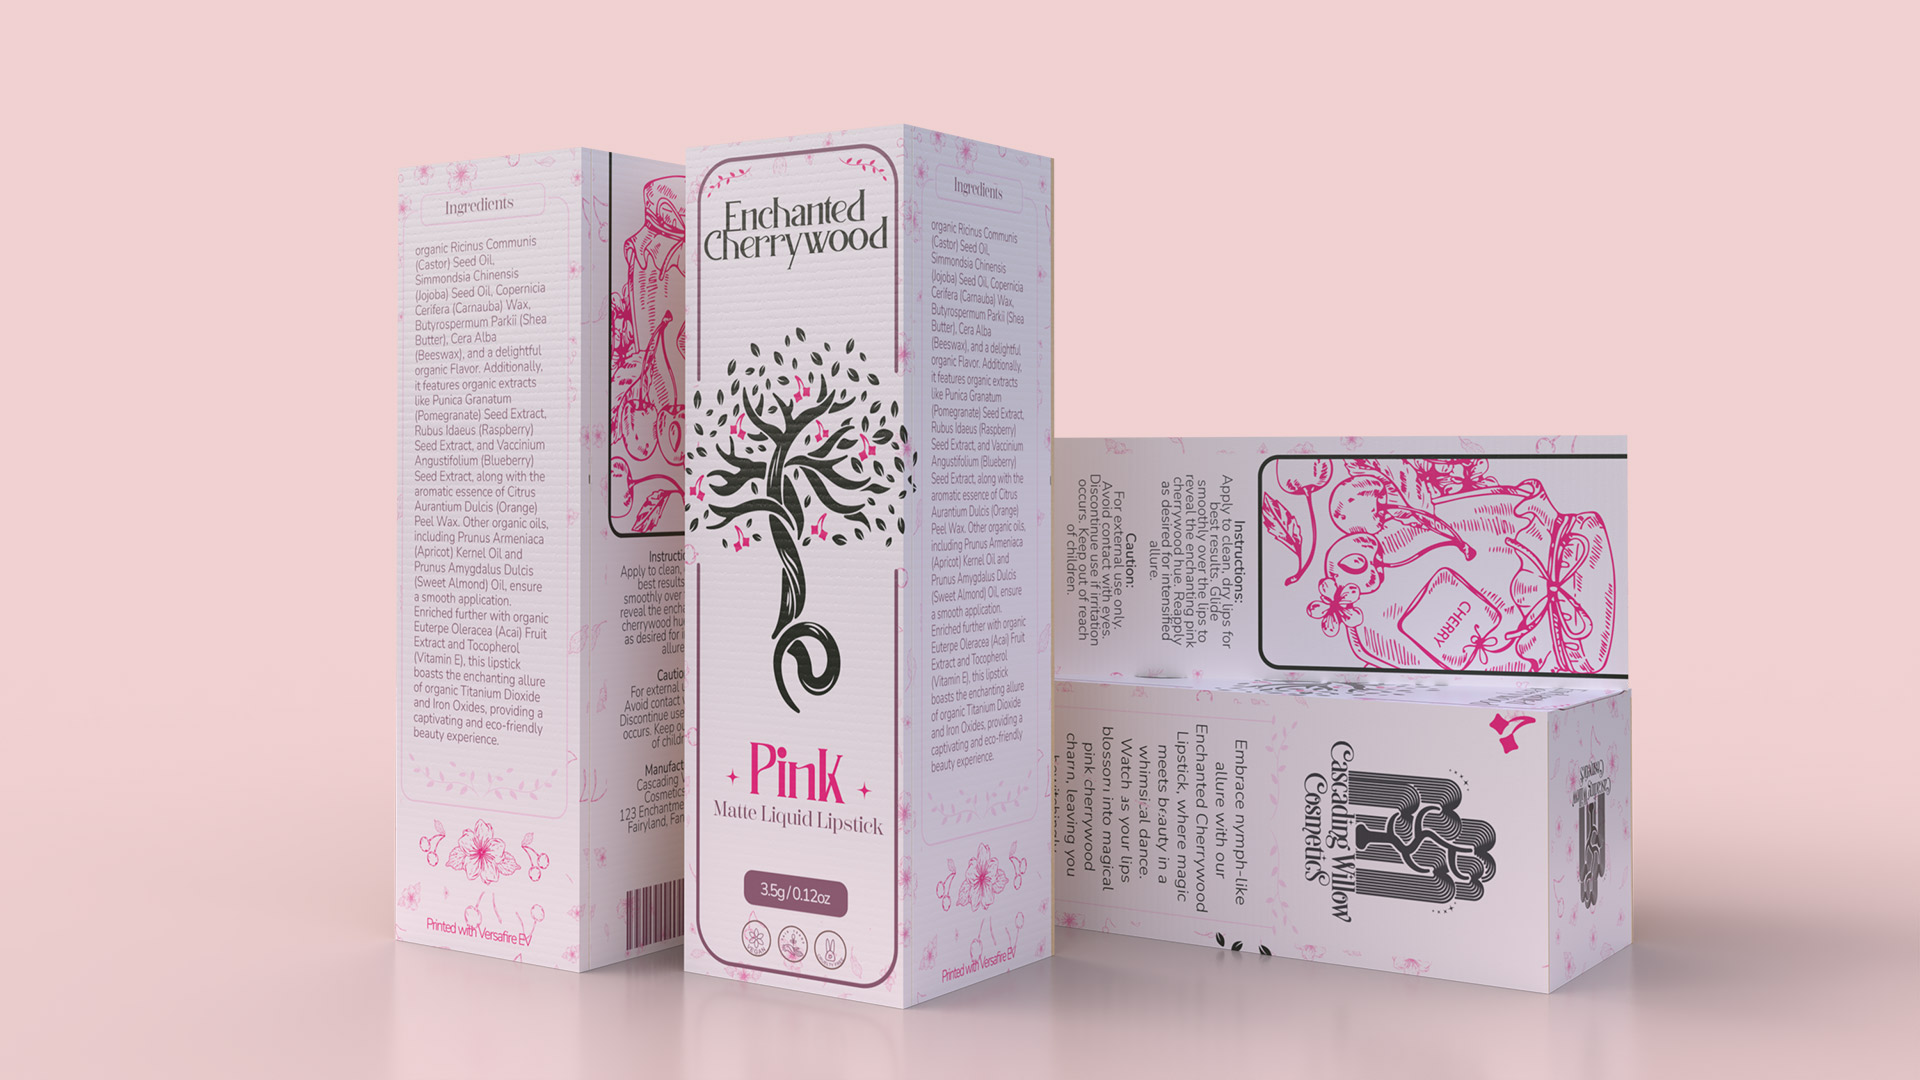 Enchanted Cherrywood Makeup box / Enchanted Cherrywood Makeup box:  5 x 1.6 inches, Packaging design, 2023, Packaging design for a Liquid lipstick called Enchanted Cherrywood for a company called Cascading willow cosmetics. Inspiration came from the love fantasy and fairies.